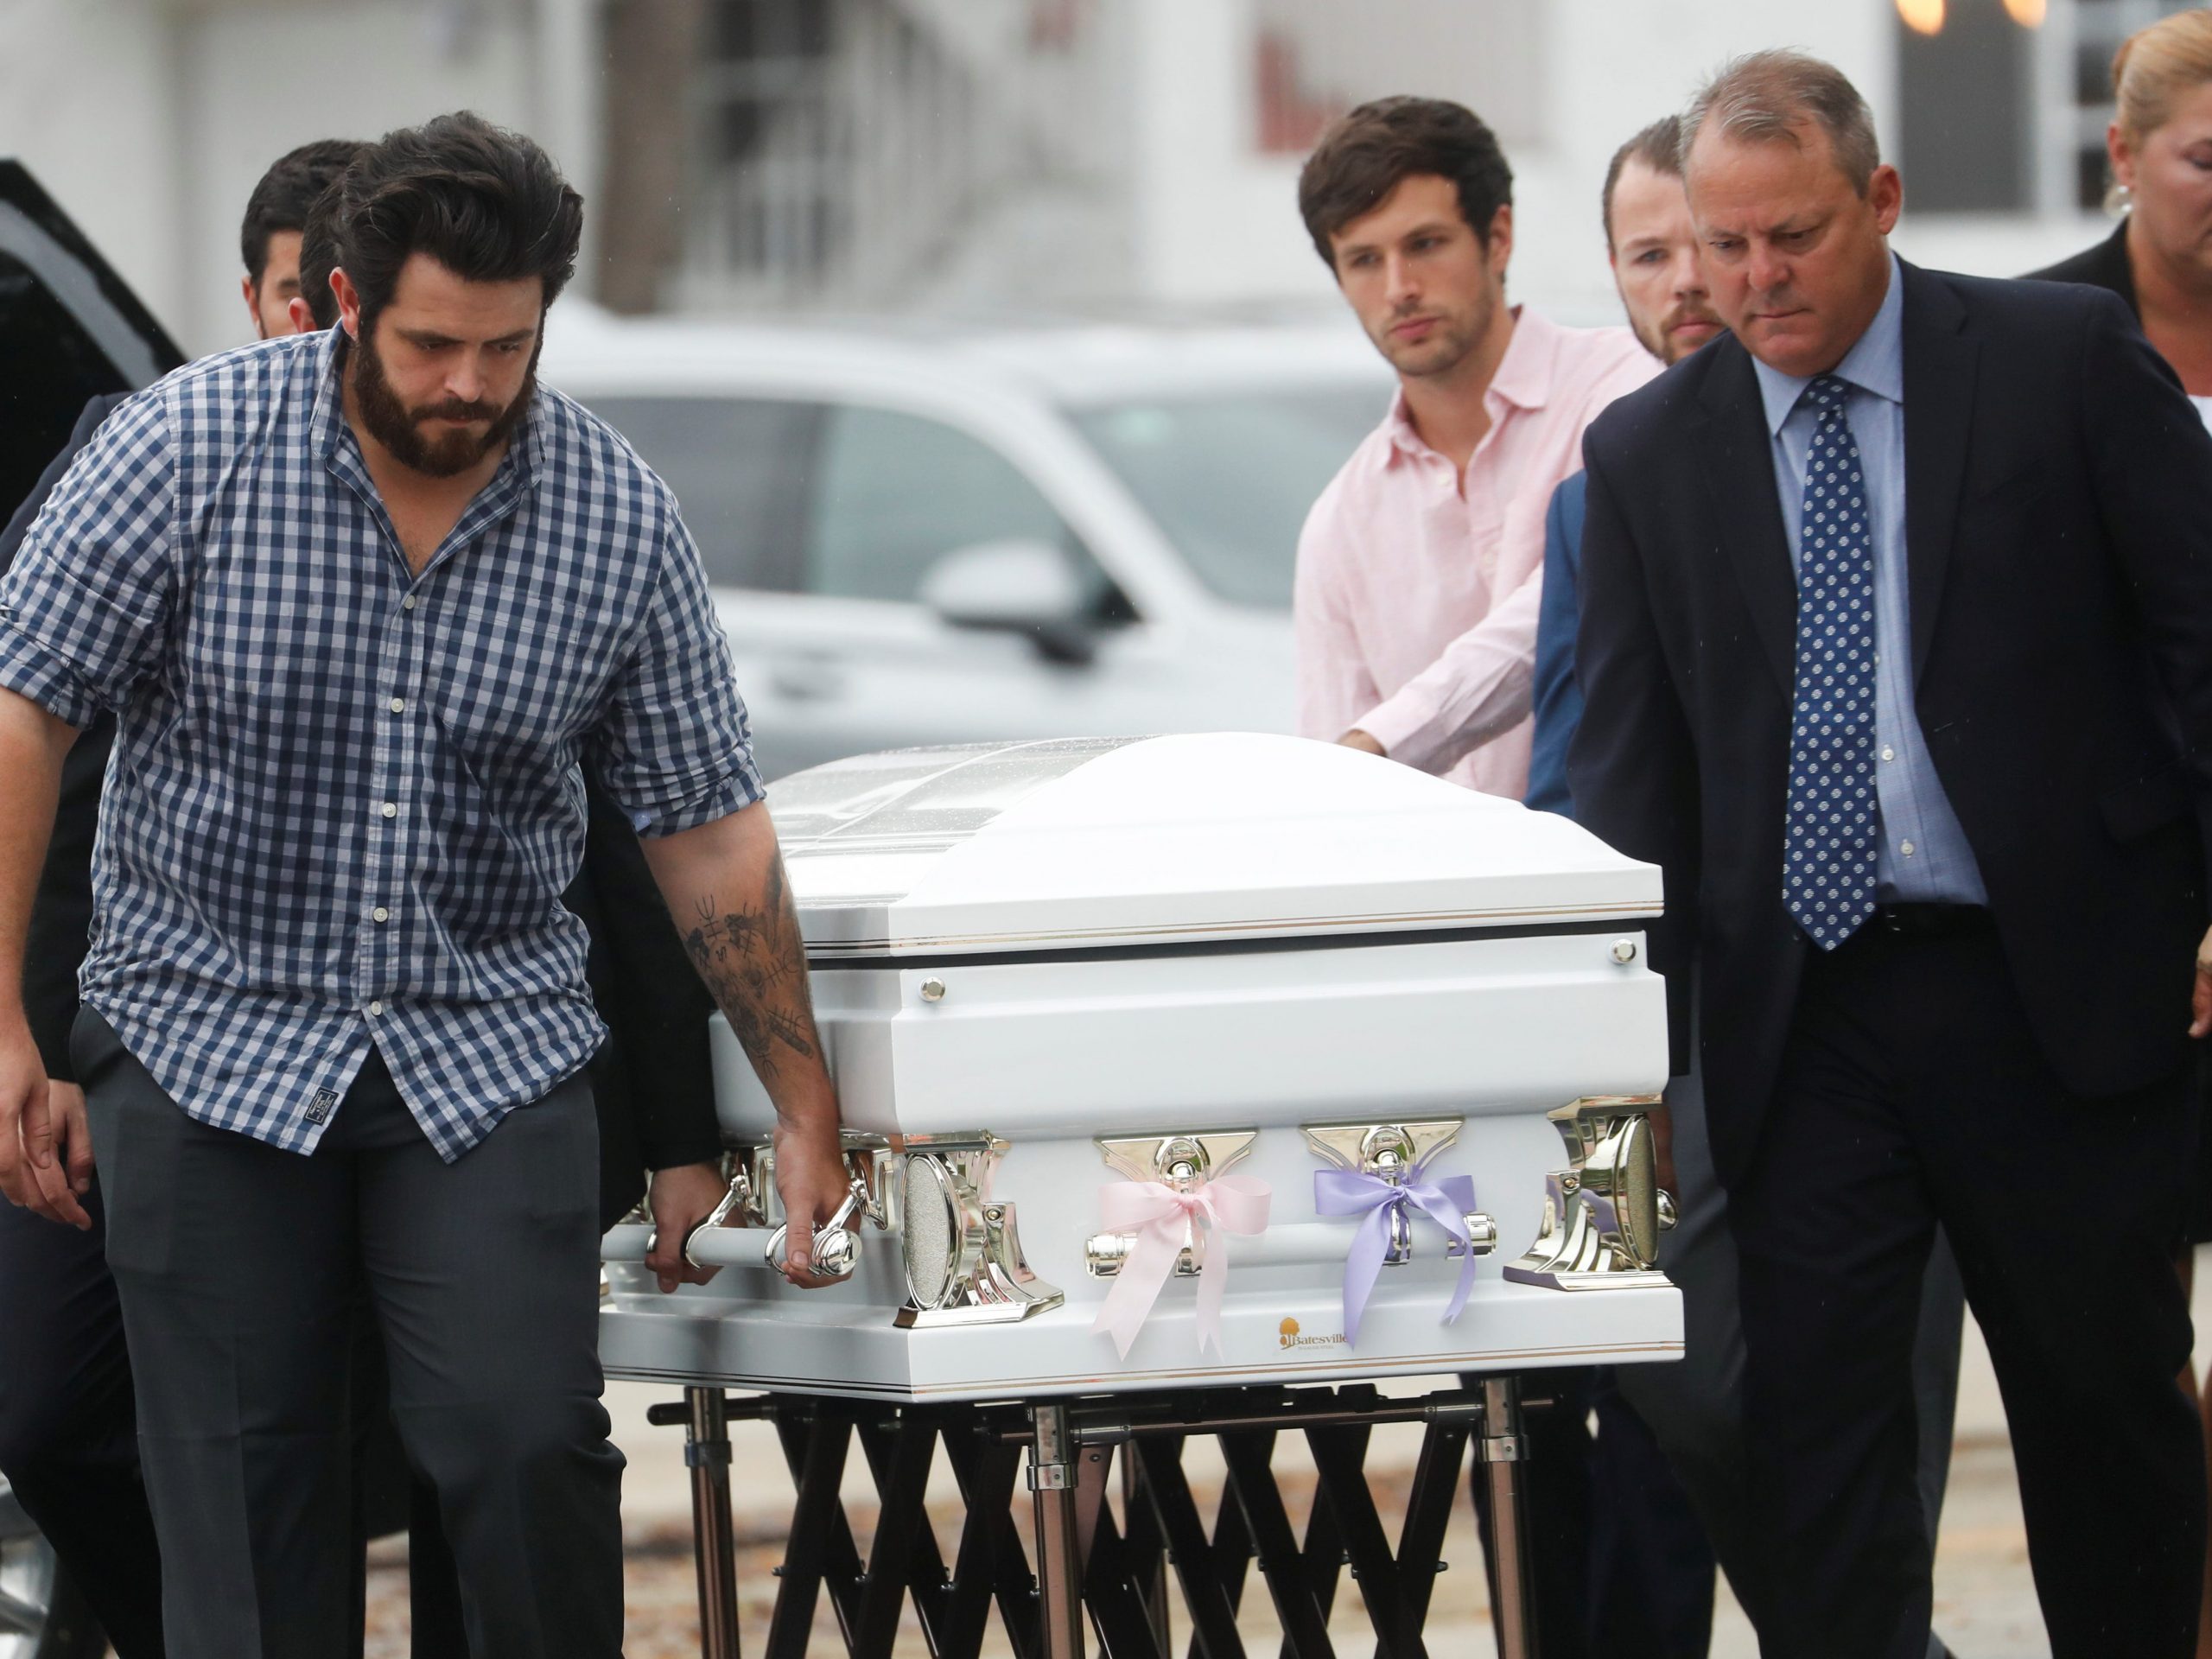 An image of pallbearers taking the casket shared by Emma and Lucia Guara, 11 and 4, thought to be the youngest victims of the Miami condo collapse